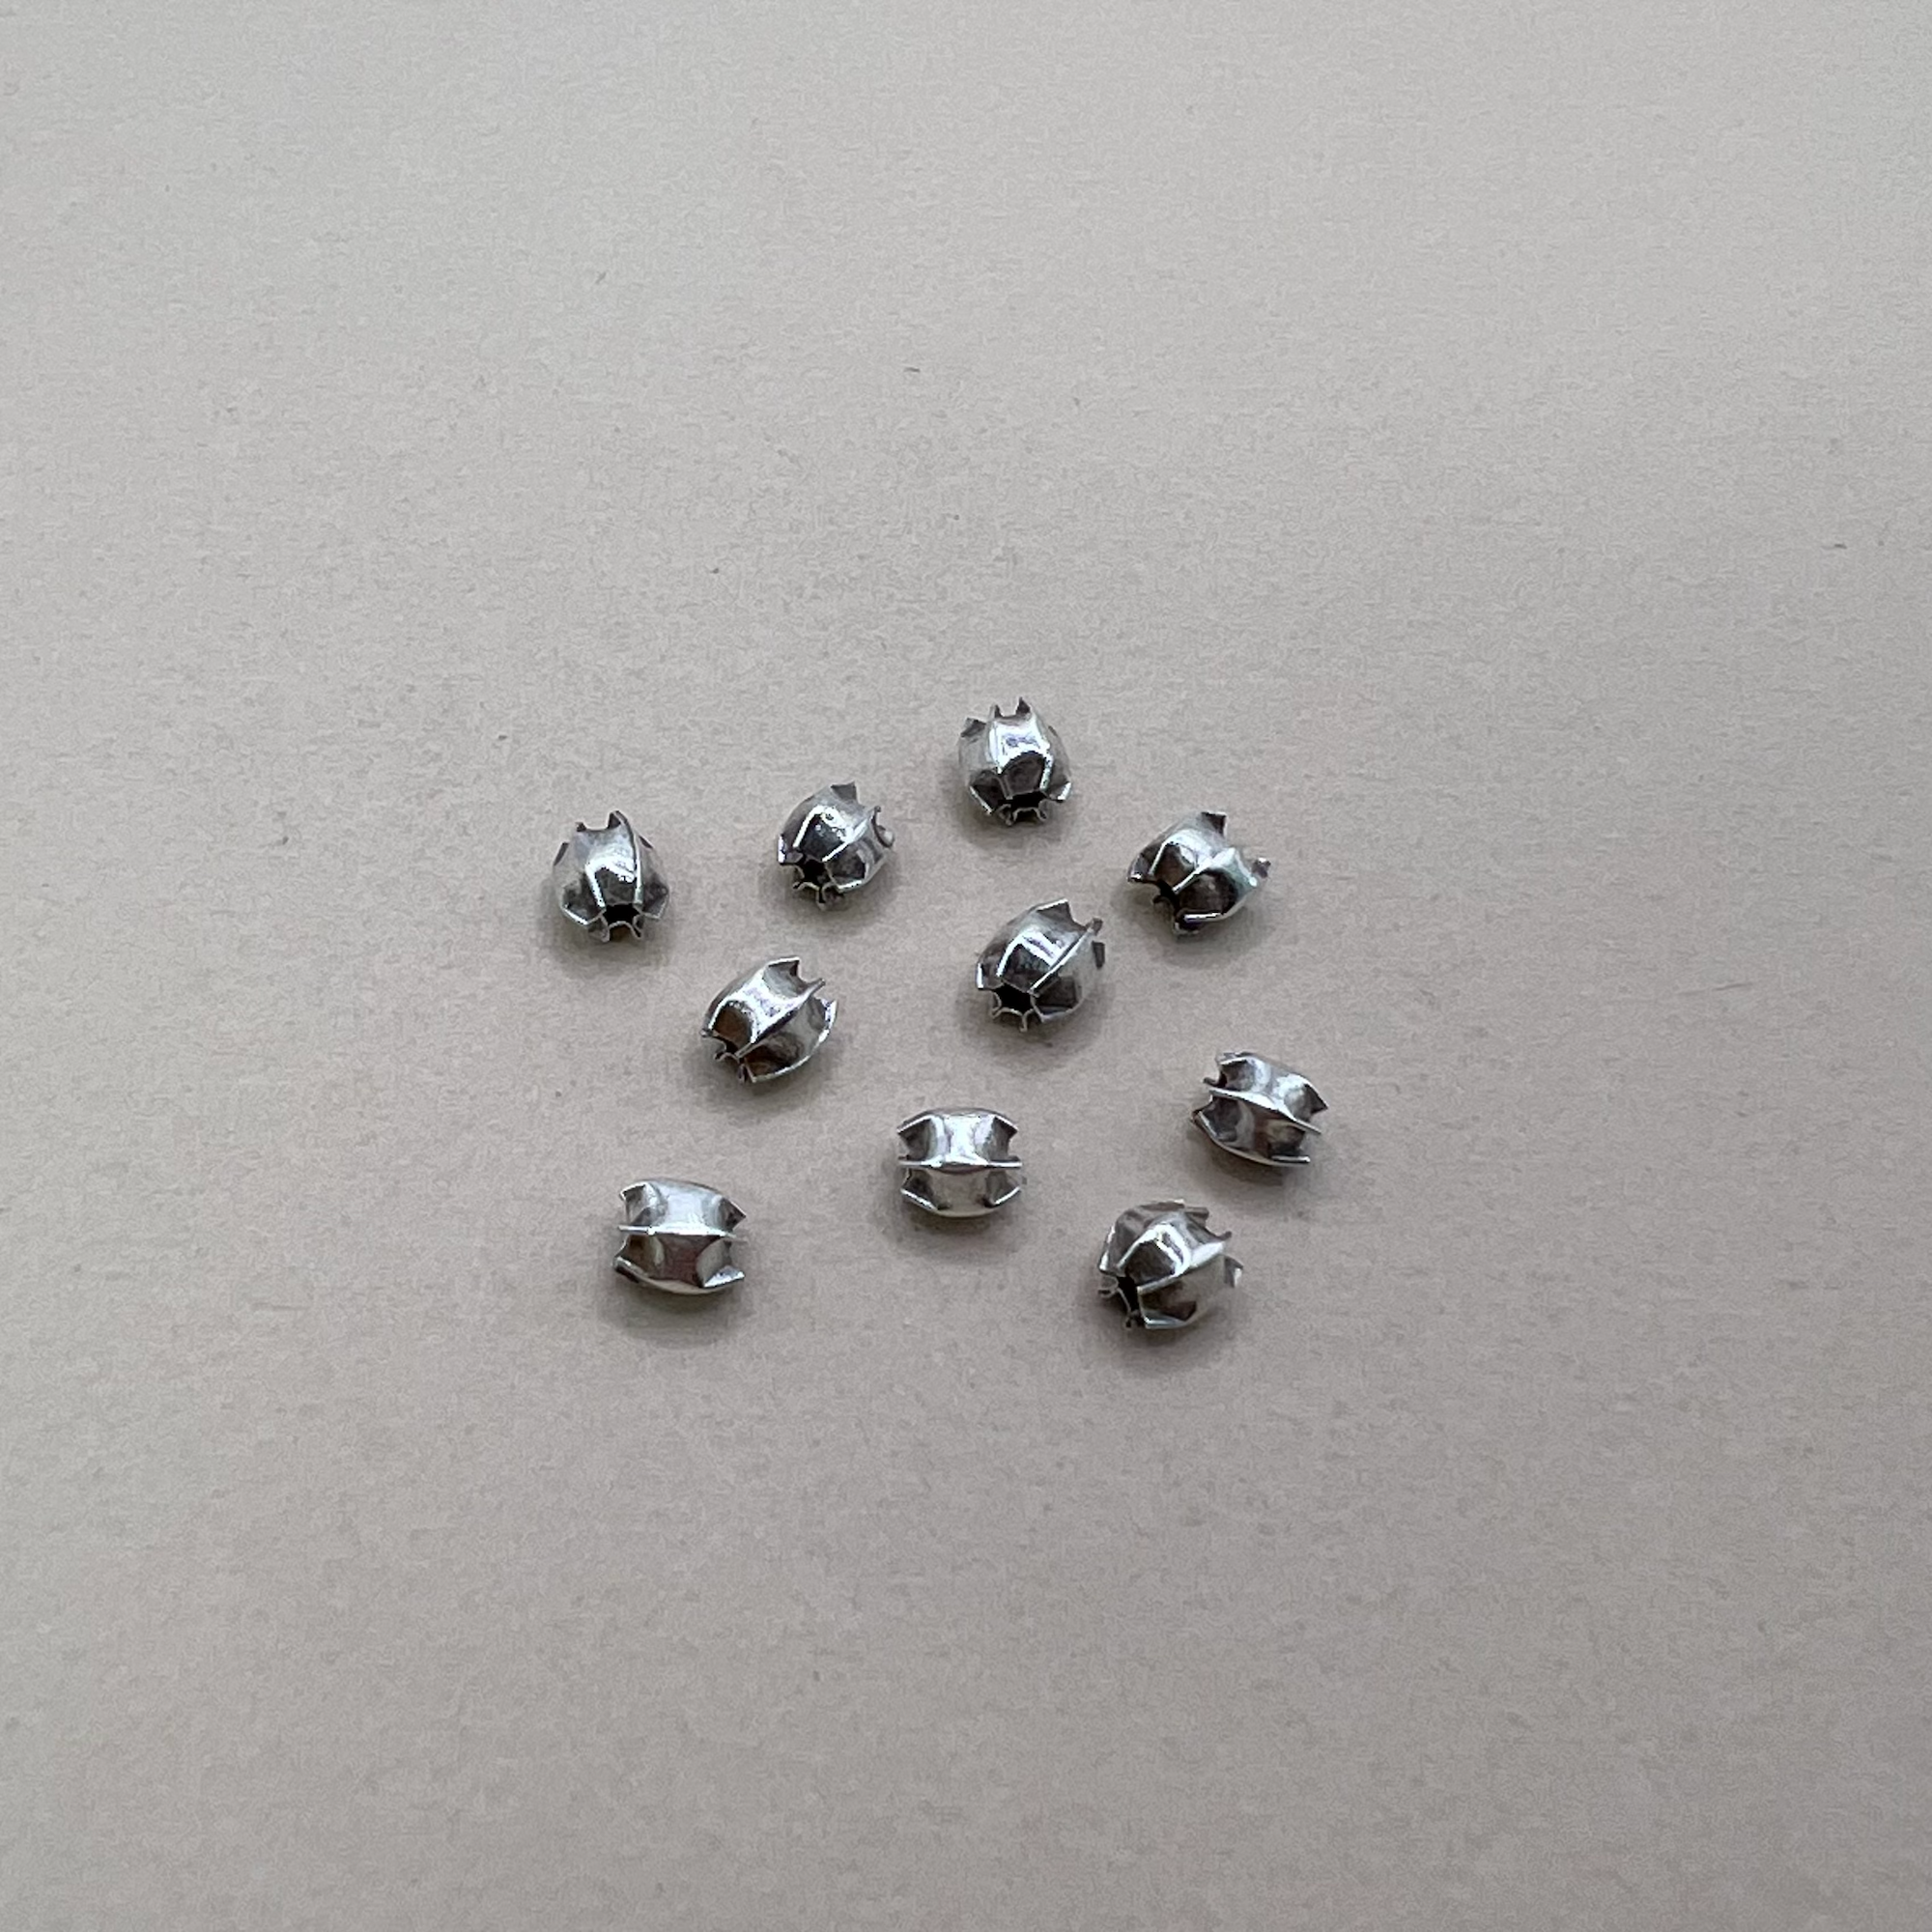 Hill Tribe Fine Silver Pinched Tube Beads - 10 Pieces